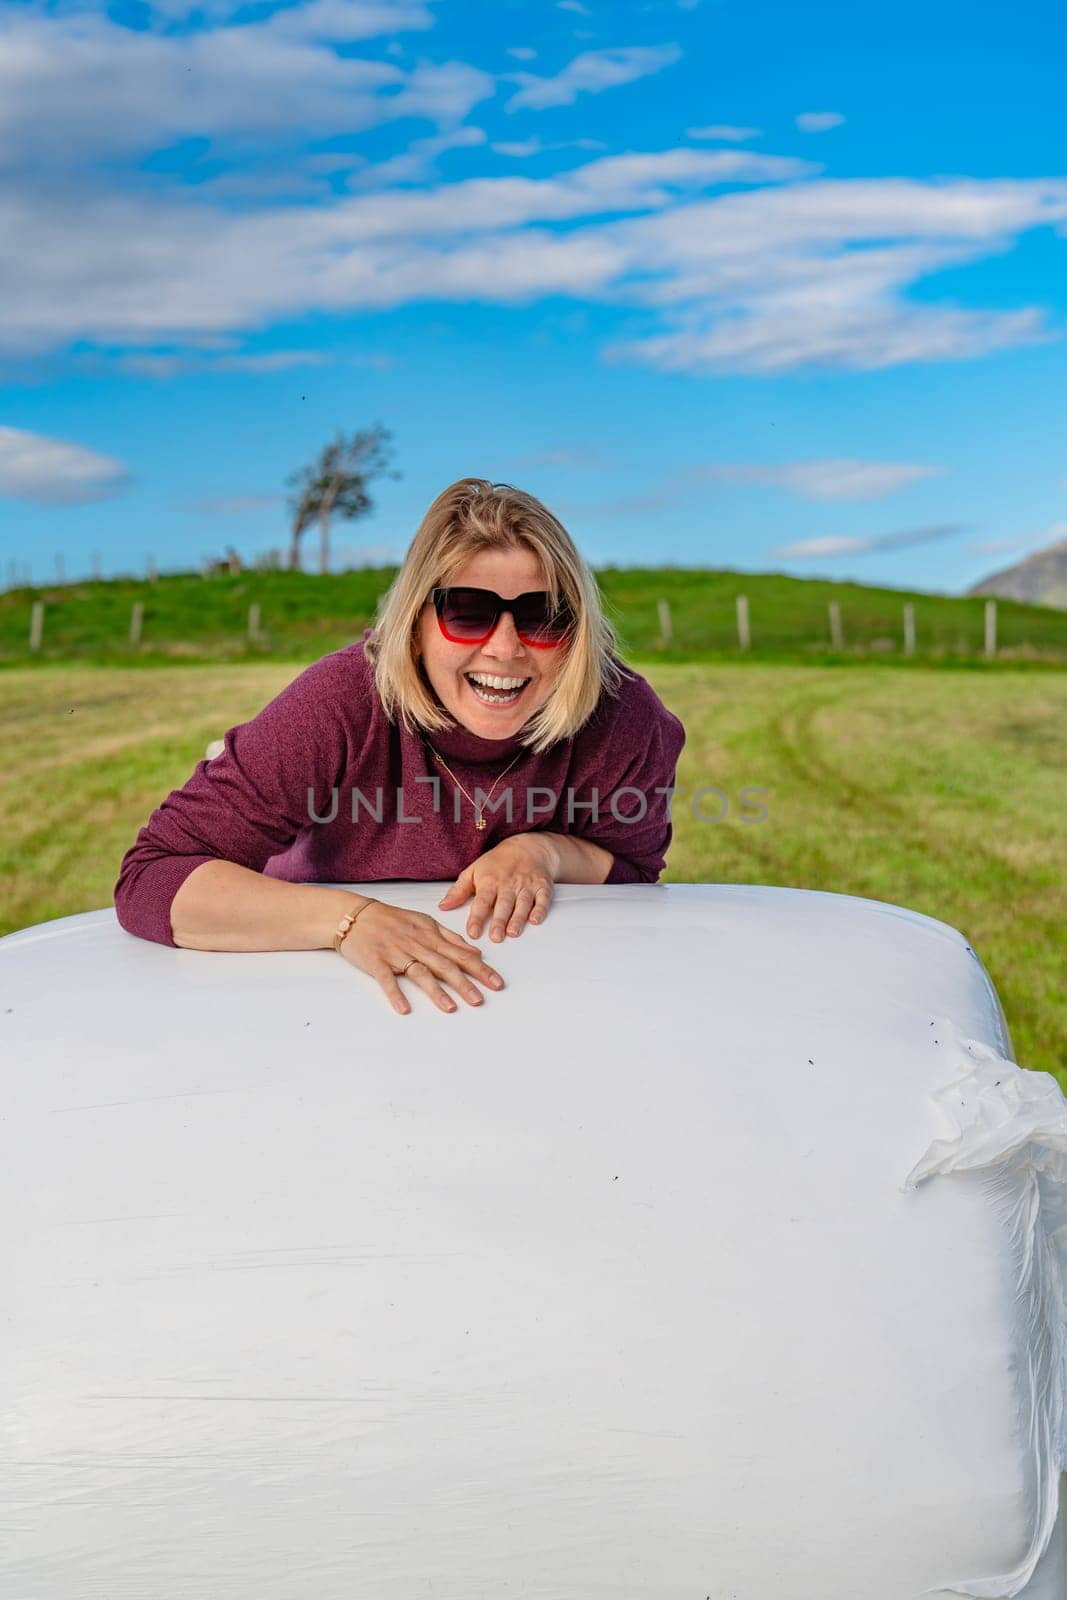 40-Year-Old Female Enjoying Serenity on Packed Hay in a Picturesque Farm Field Landscape by PhotoTime